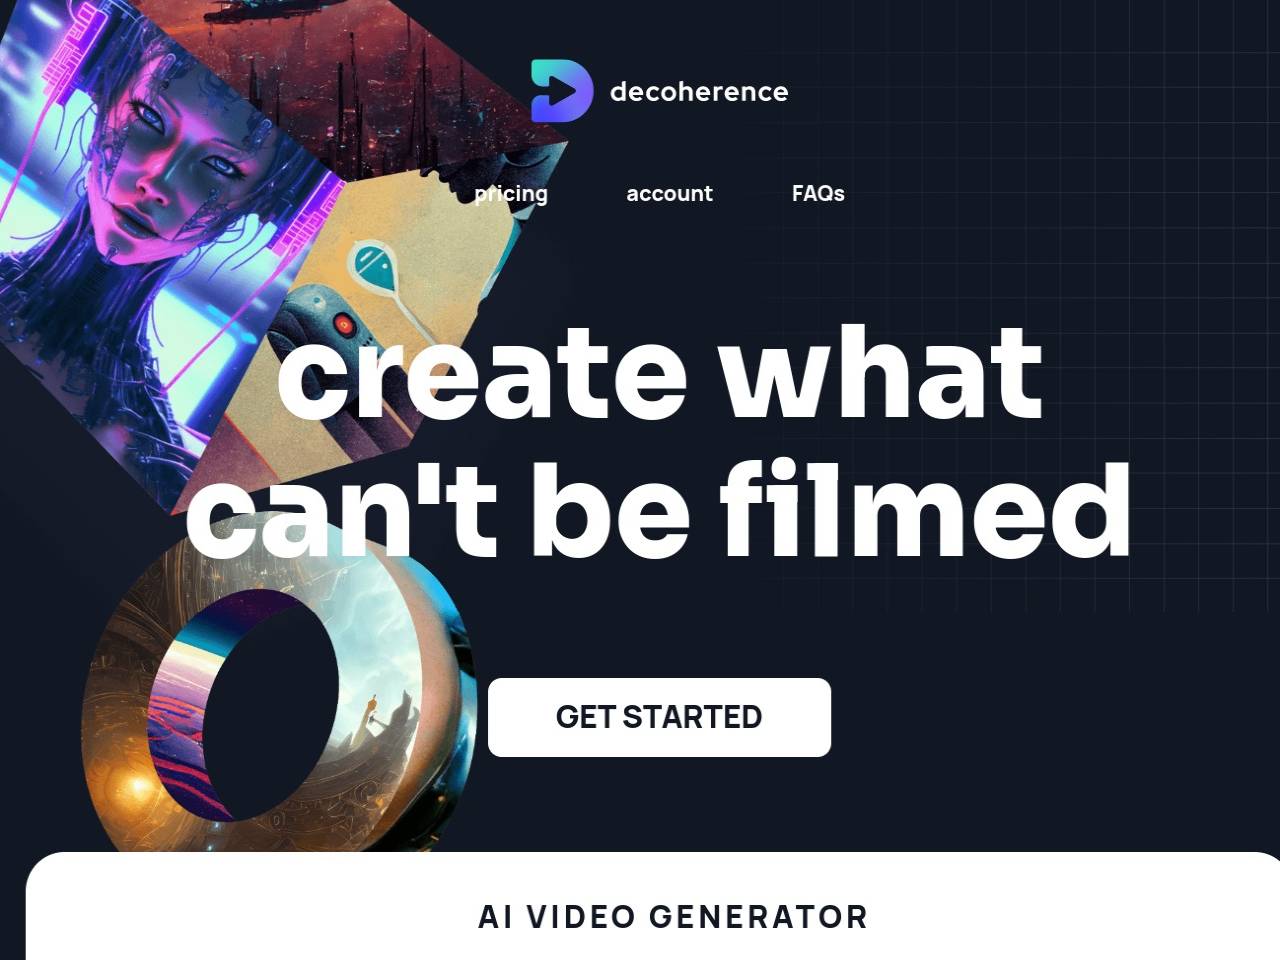 Decoherence - Create video with prompts